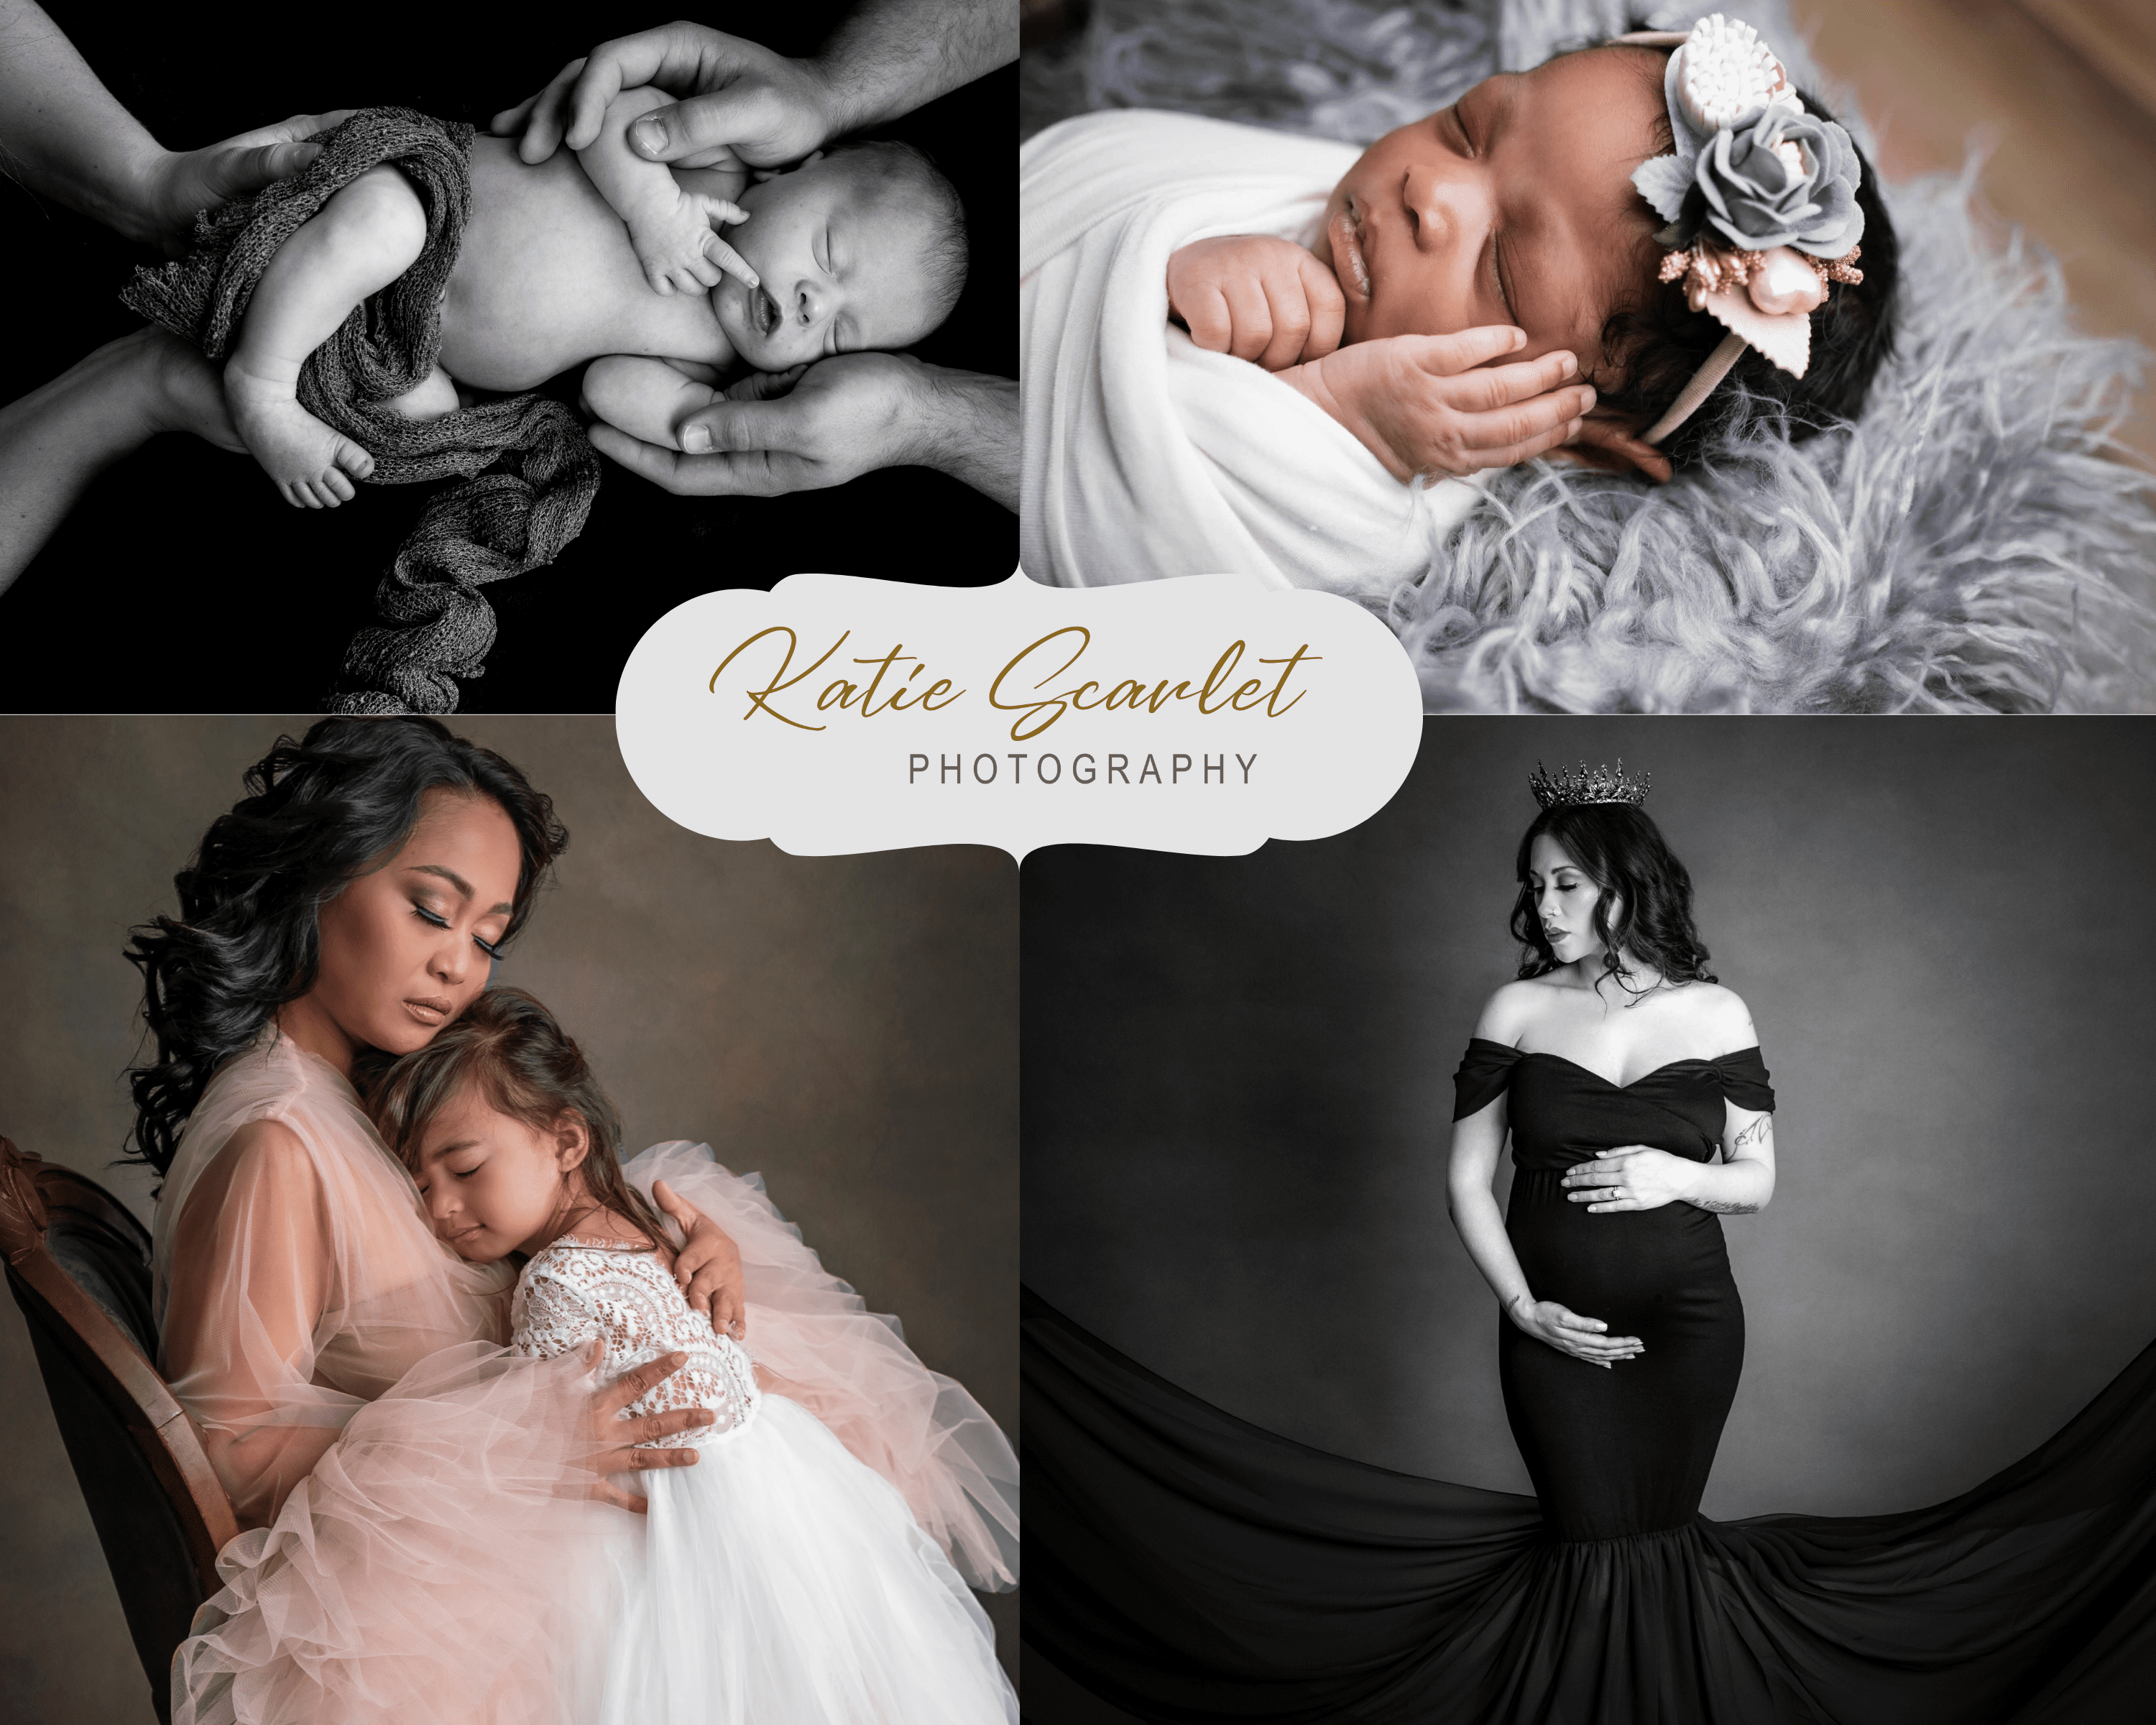 specializes in newborn, maternity, motherhood, and family fine art portraits